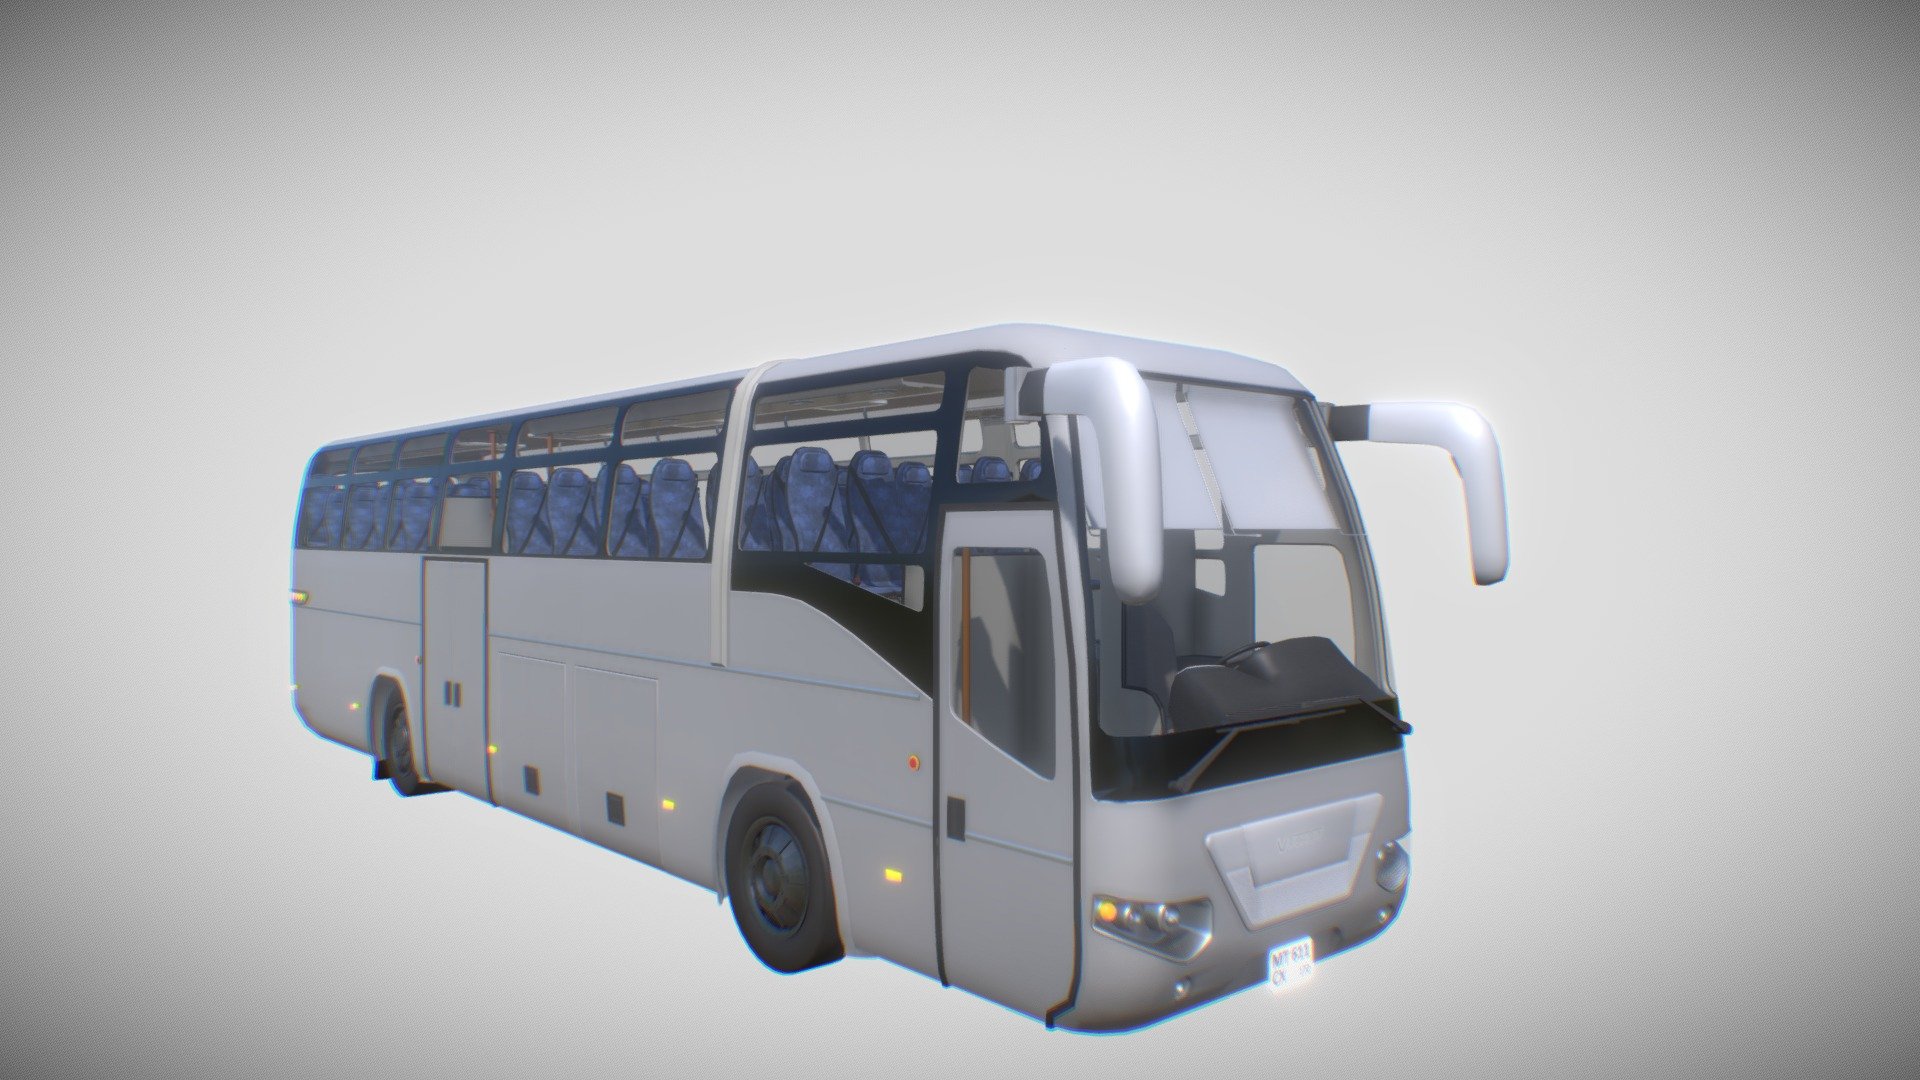 We present you a model of a passenger bus, all parts are movable. A modular road will allow you to assemble your route. There is also an imitation of rain. It is well suited for driving simulators, training, as well as VR projects 3d model